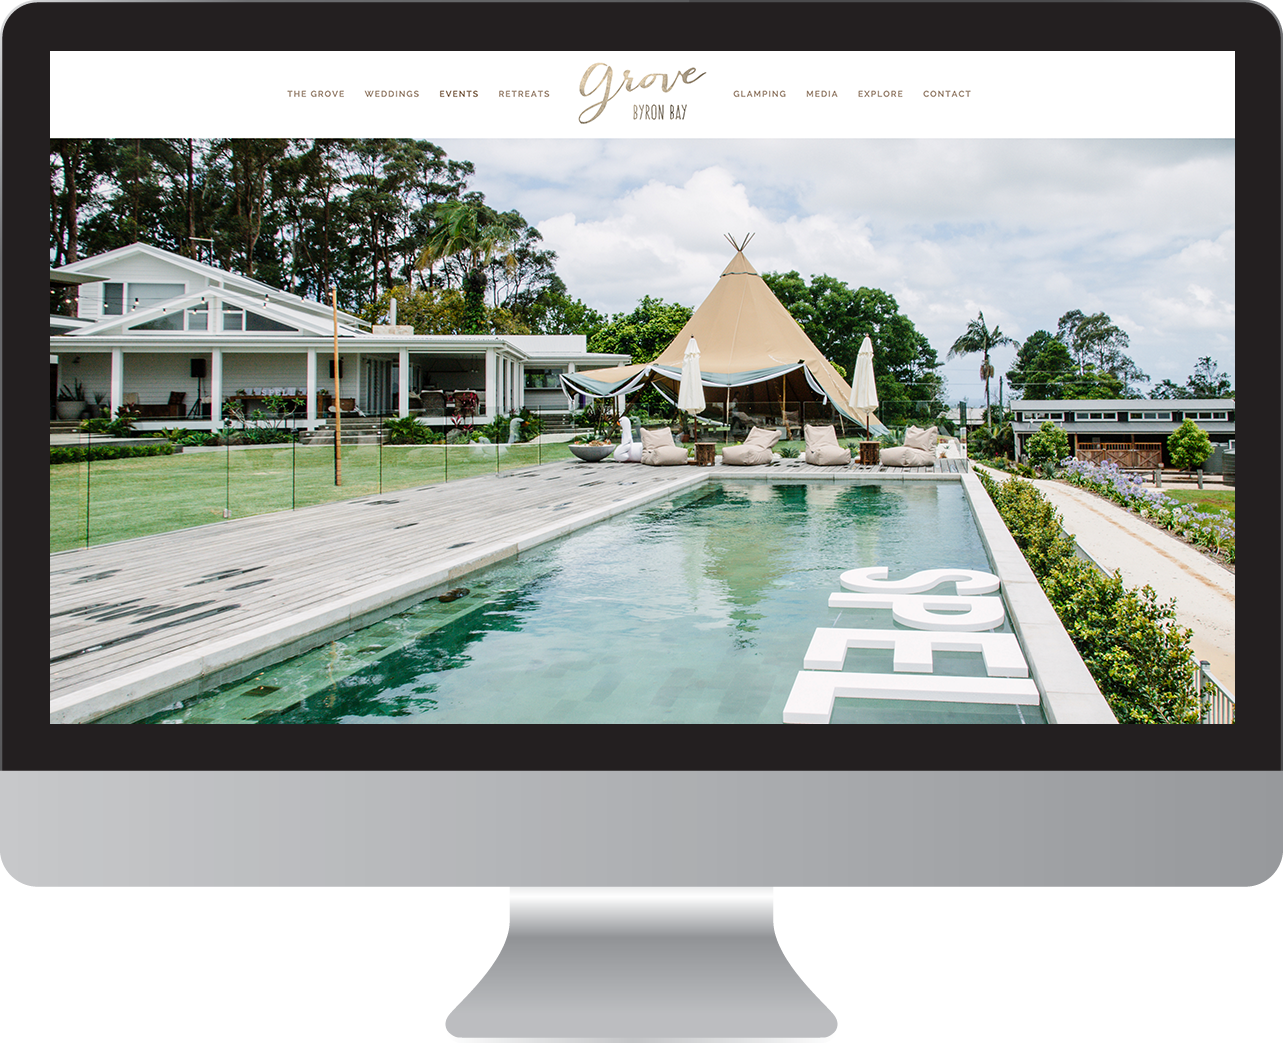 The Grove Byron Bay website design and branding